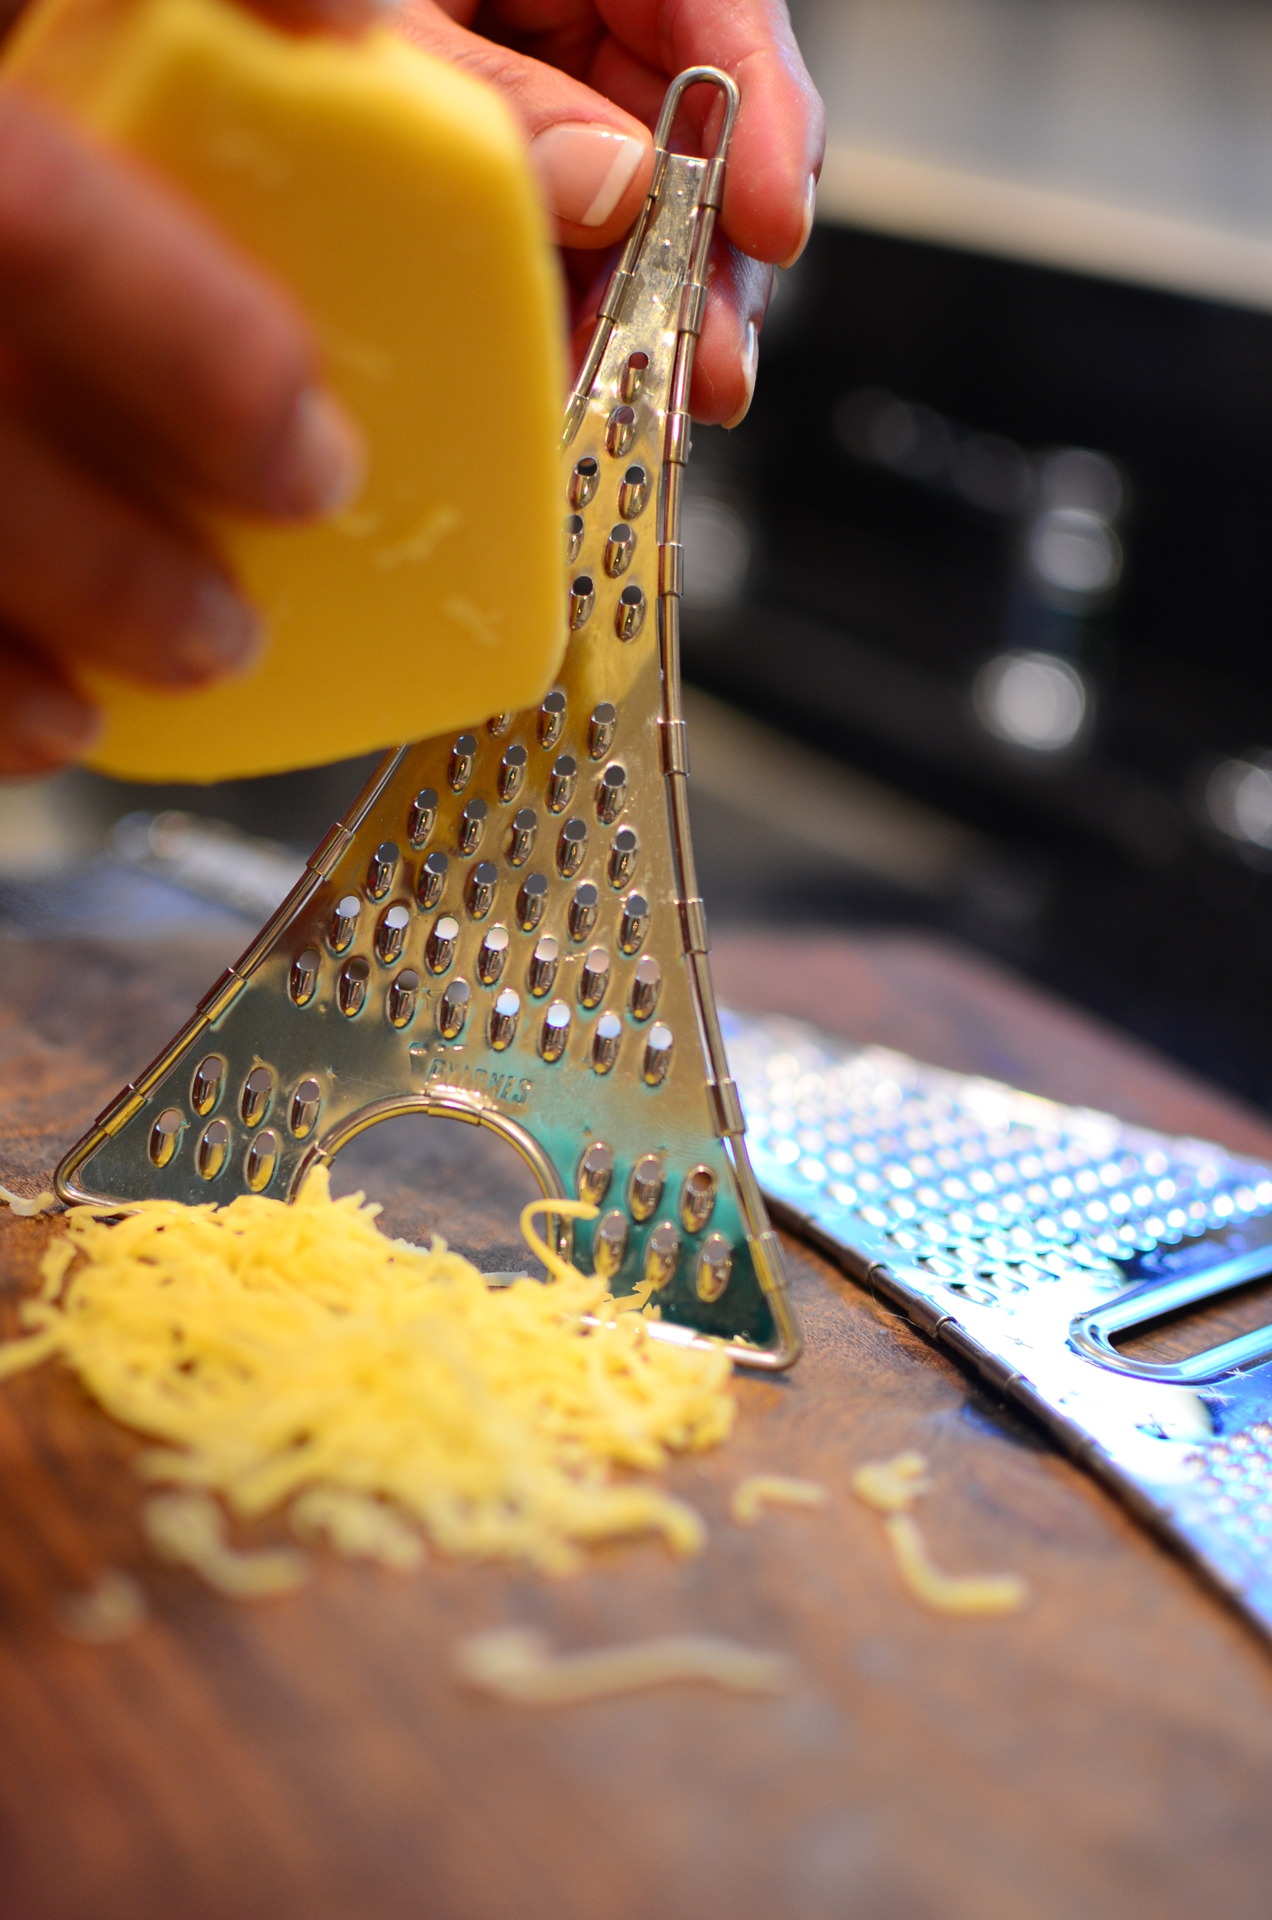 Eiffel Tower cheese graters This week's kitchen